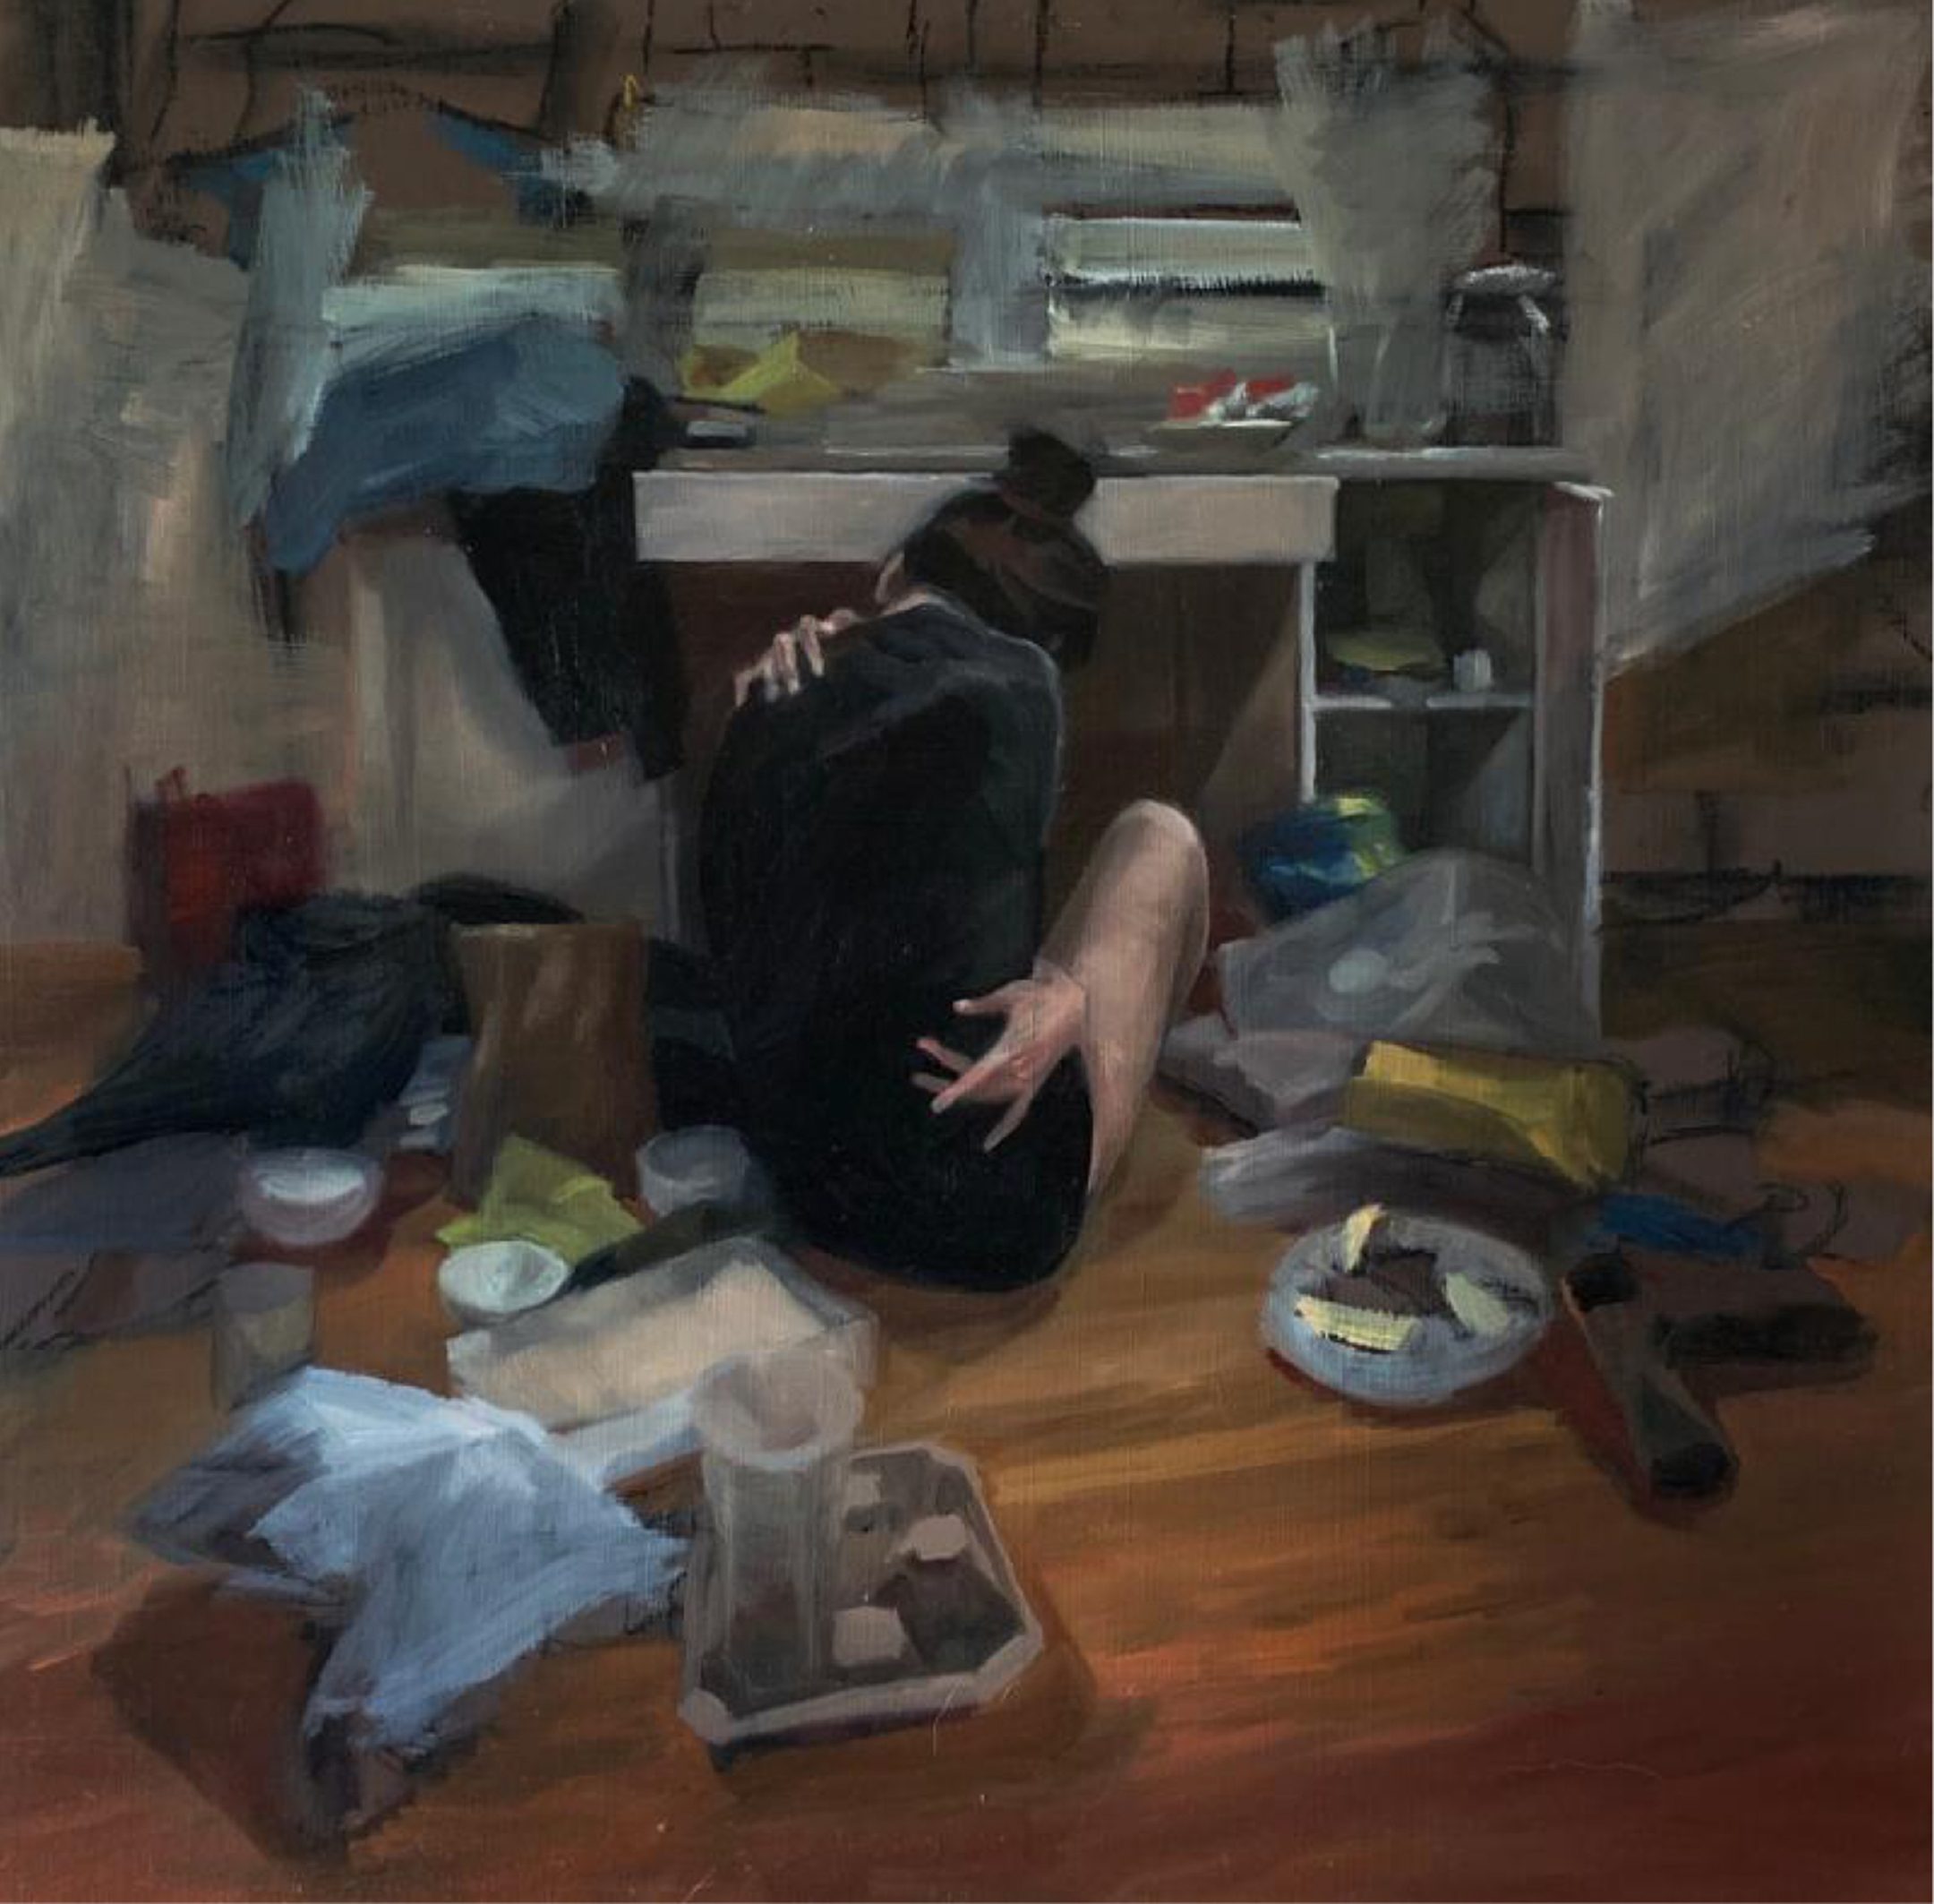 Illustration of a young woman crouched on the floor of a cluttered bedroom